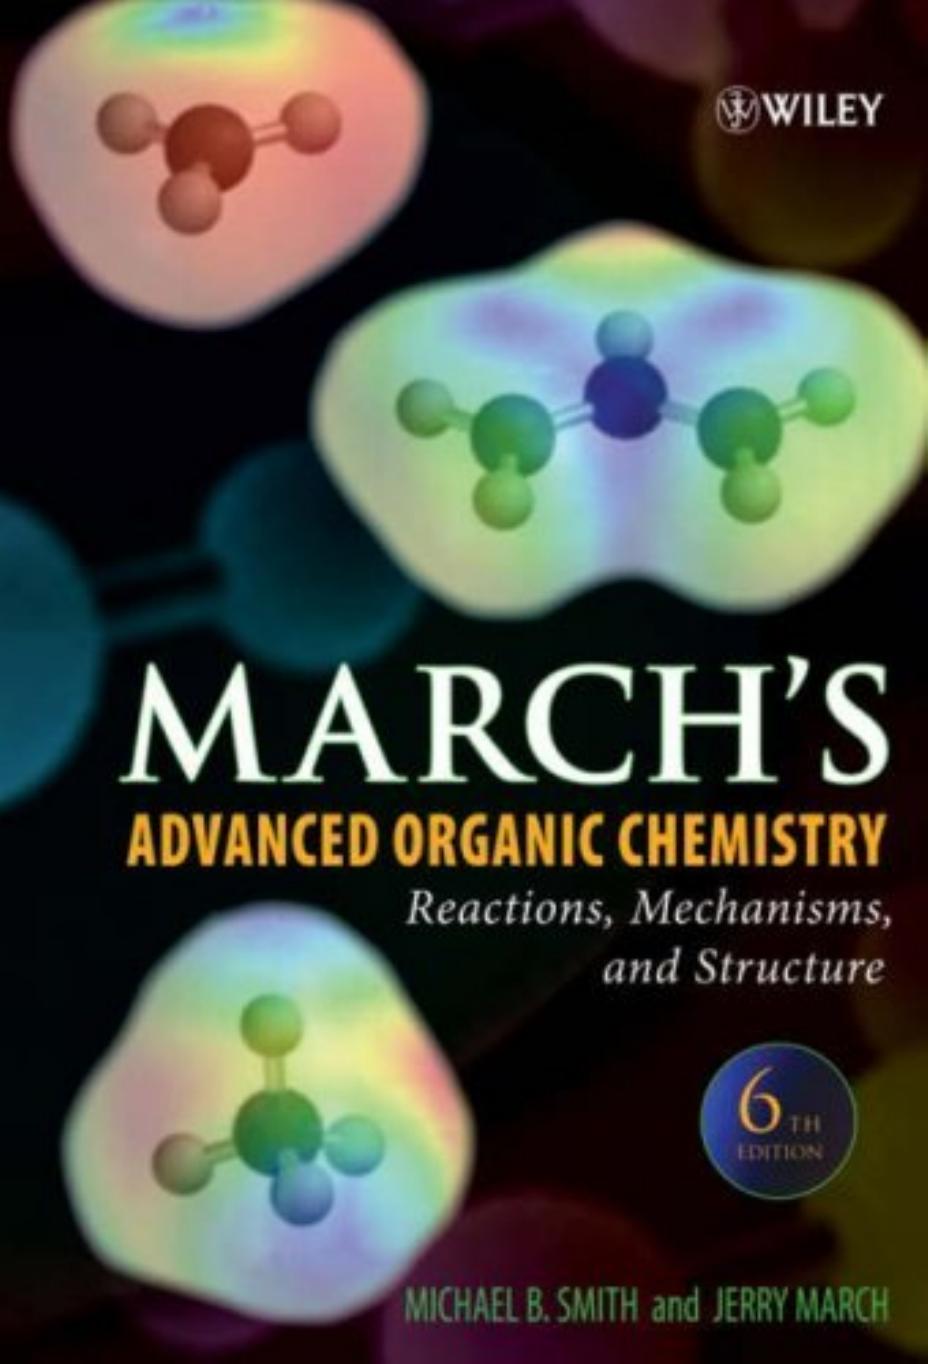 Advanced Organic Chemistry Reactions, Mechanisms, and Structure 2007